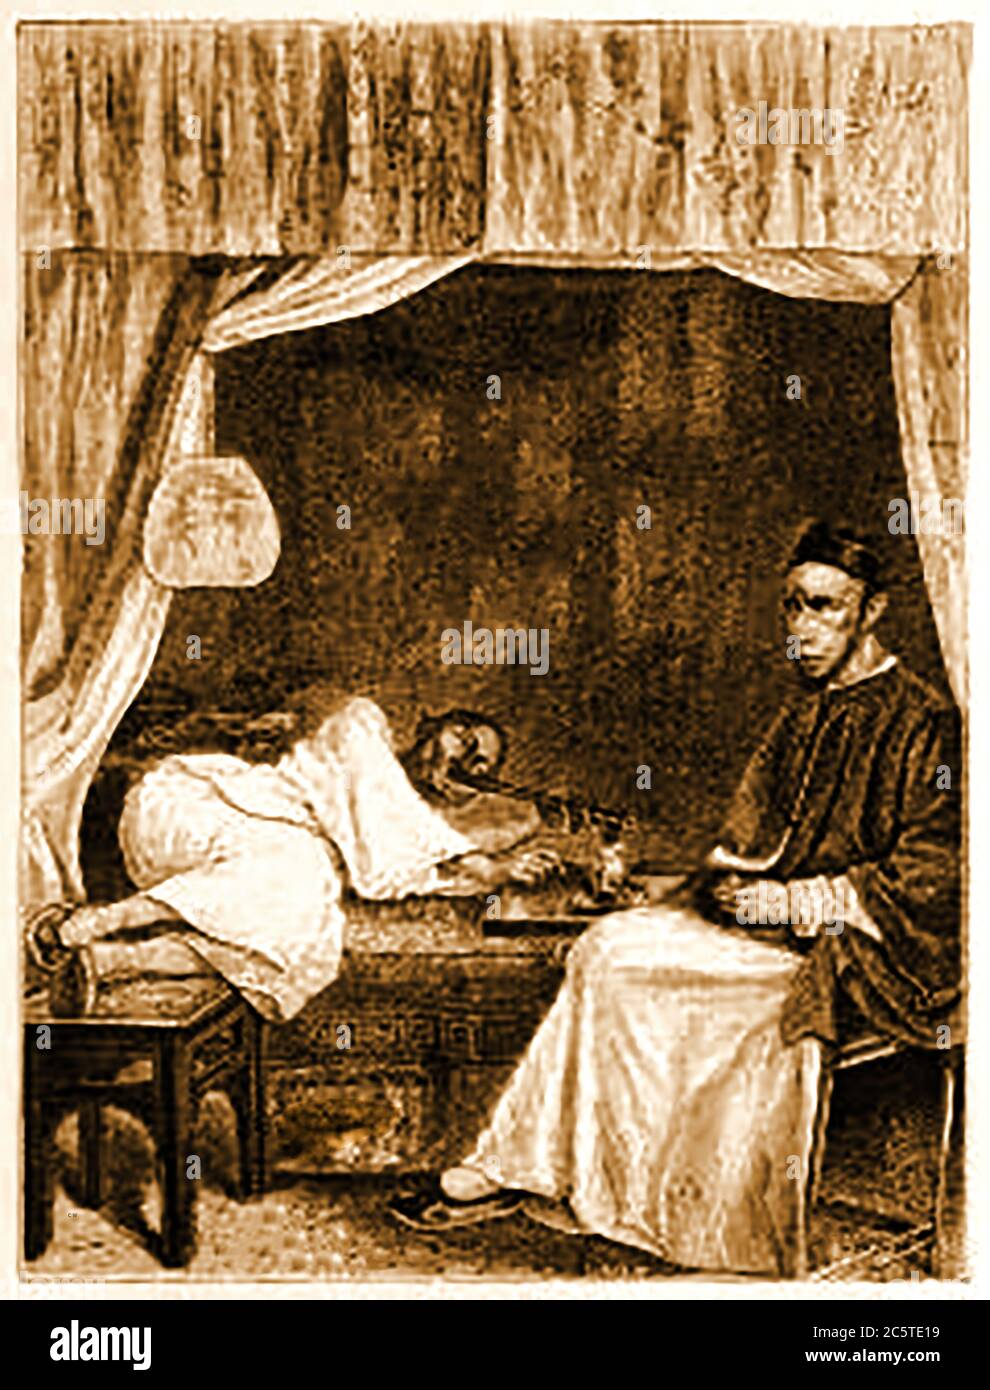 An 1880 illustration from the 'Illustrated Missionary News'. The magazine was formerly published under the title  The Pictorial missionary news edited by Henry Grattan Guinness (1835  - 1910) who was an Irish Protestant Christian preacher, evangelist and author (and others). This picture shows Chinese smoking opium in an opium den. Stock Photo